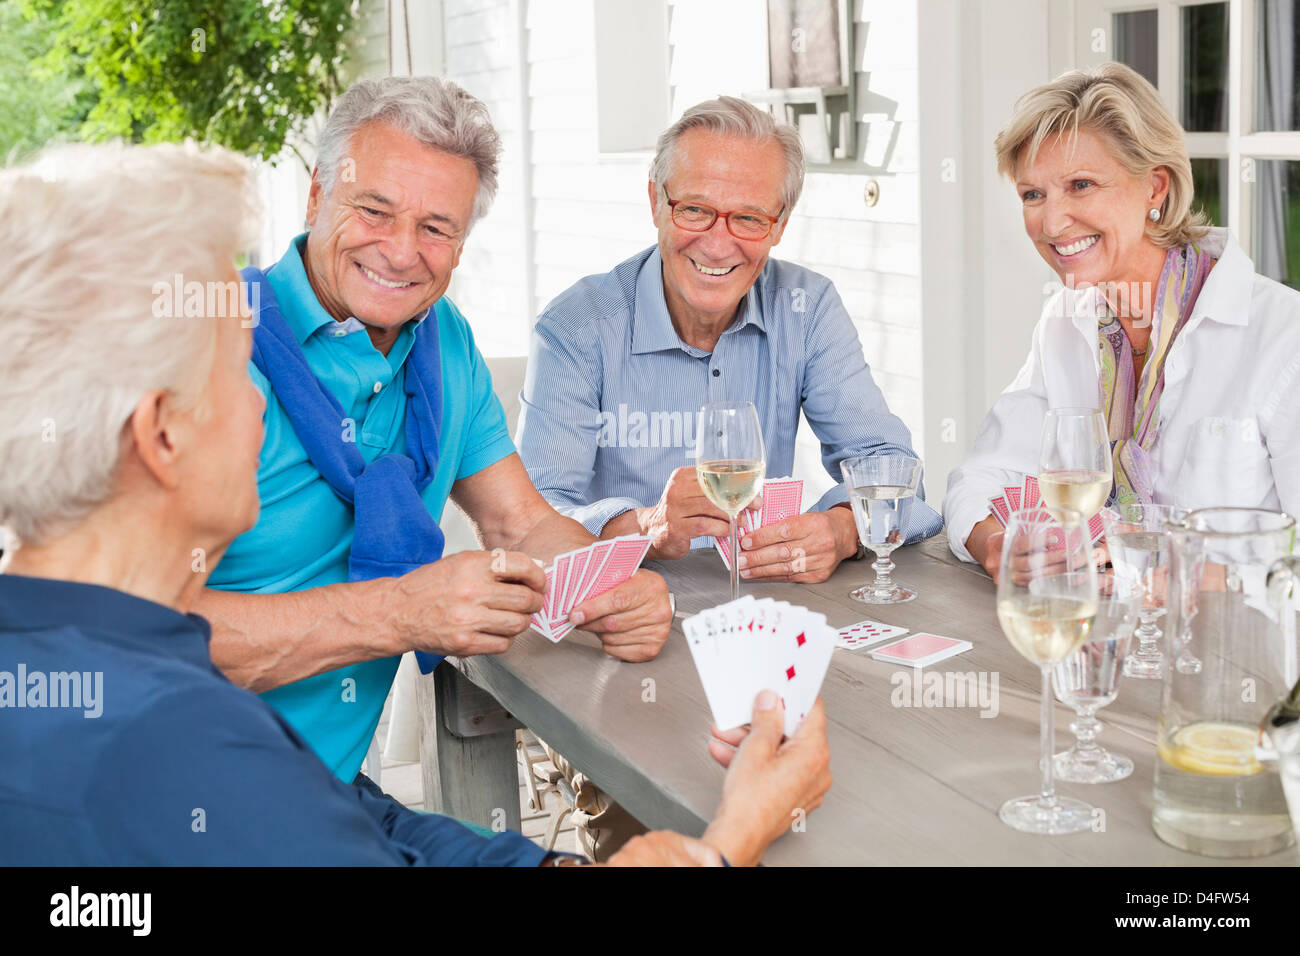 Friends playing card games at table Stock Photo